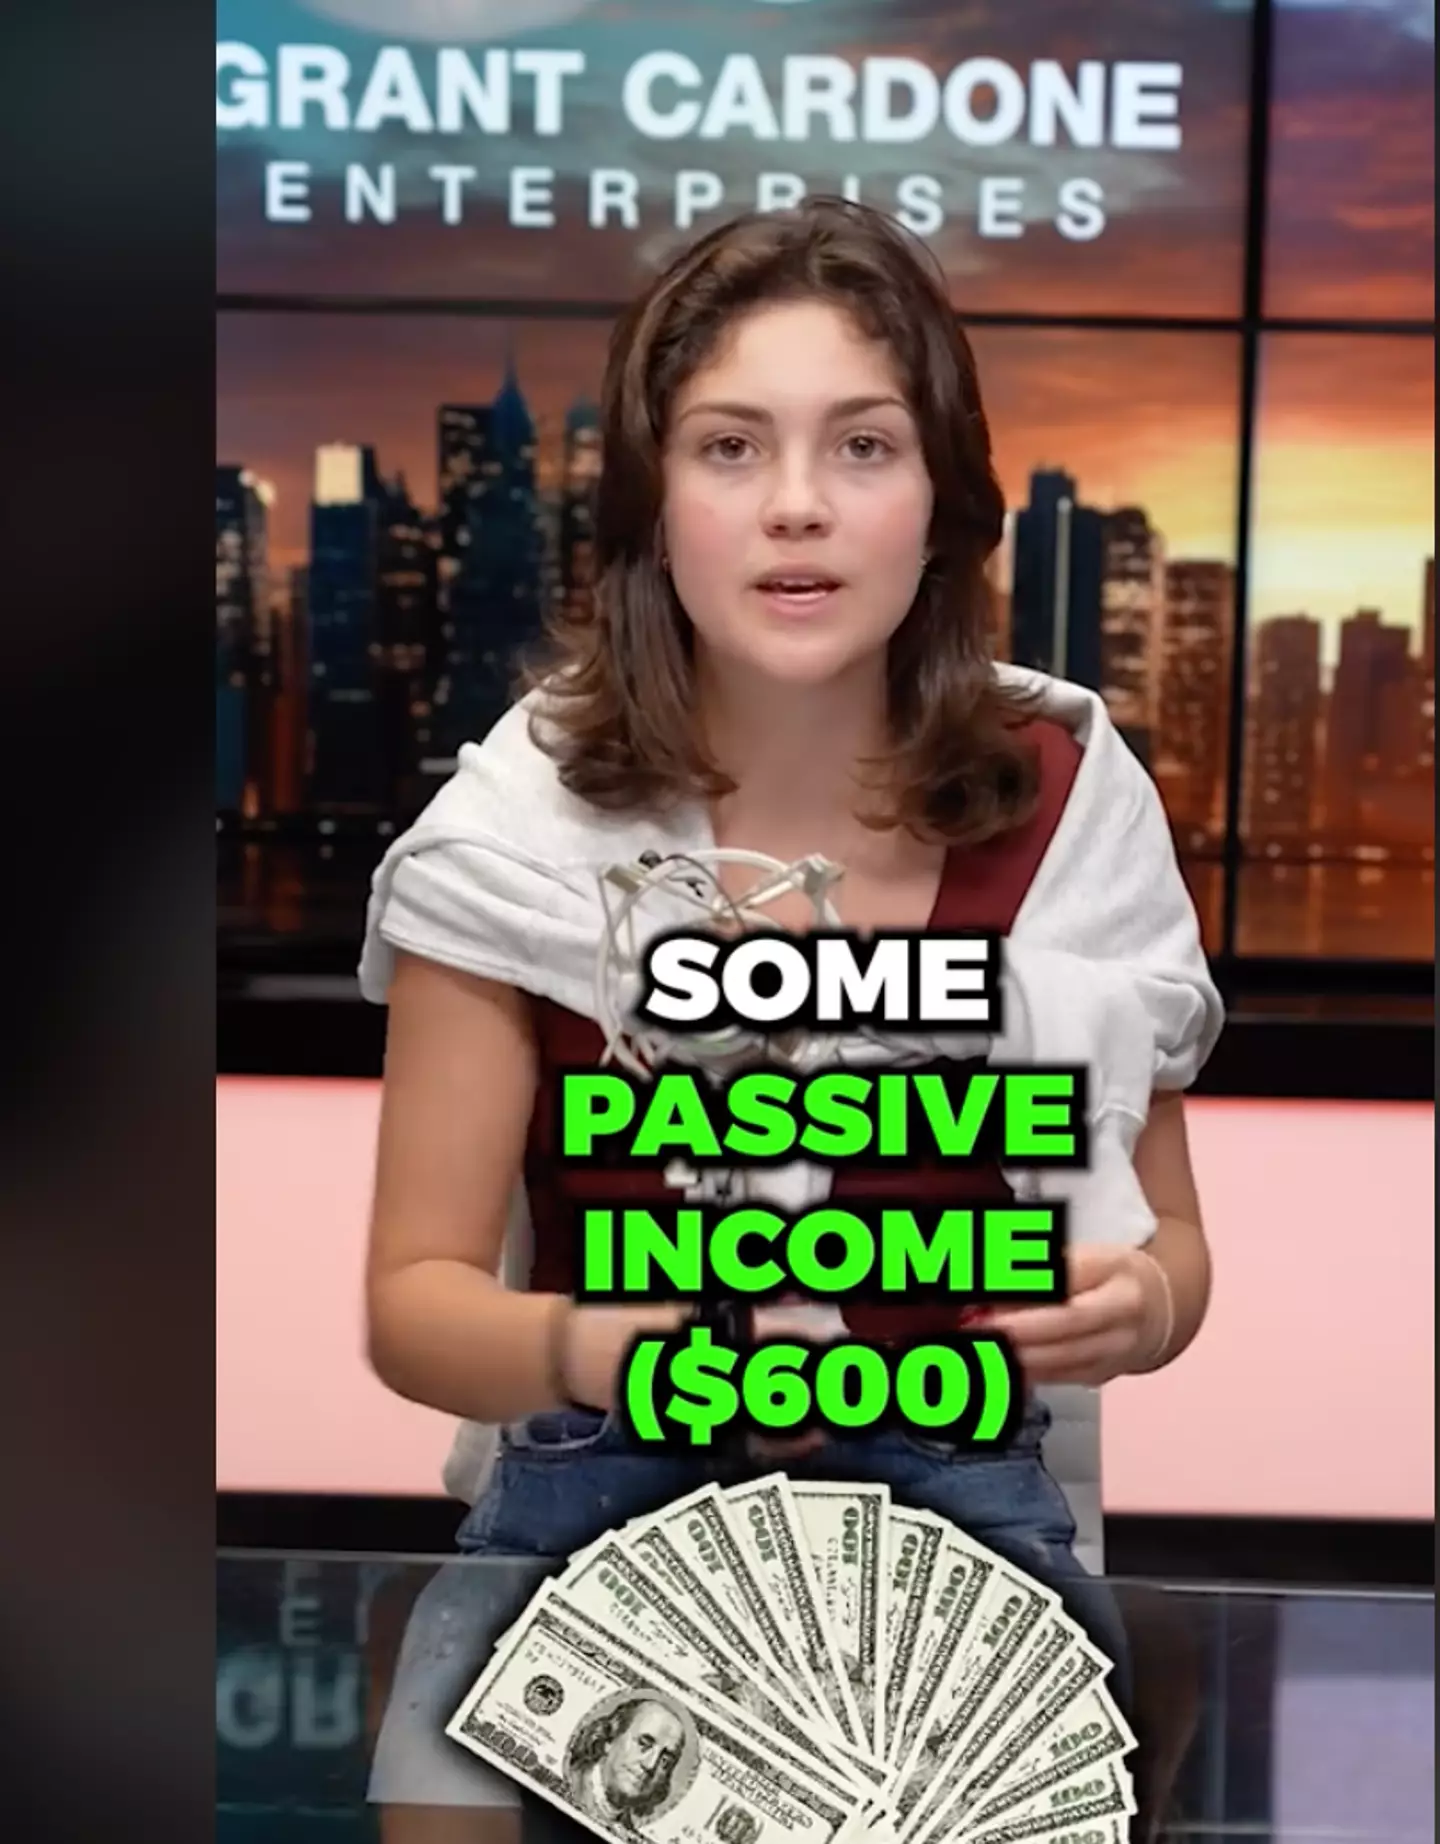 Sabrina Cardone faced ridicule after her tips on how to become a millionaire before turning 20.